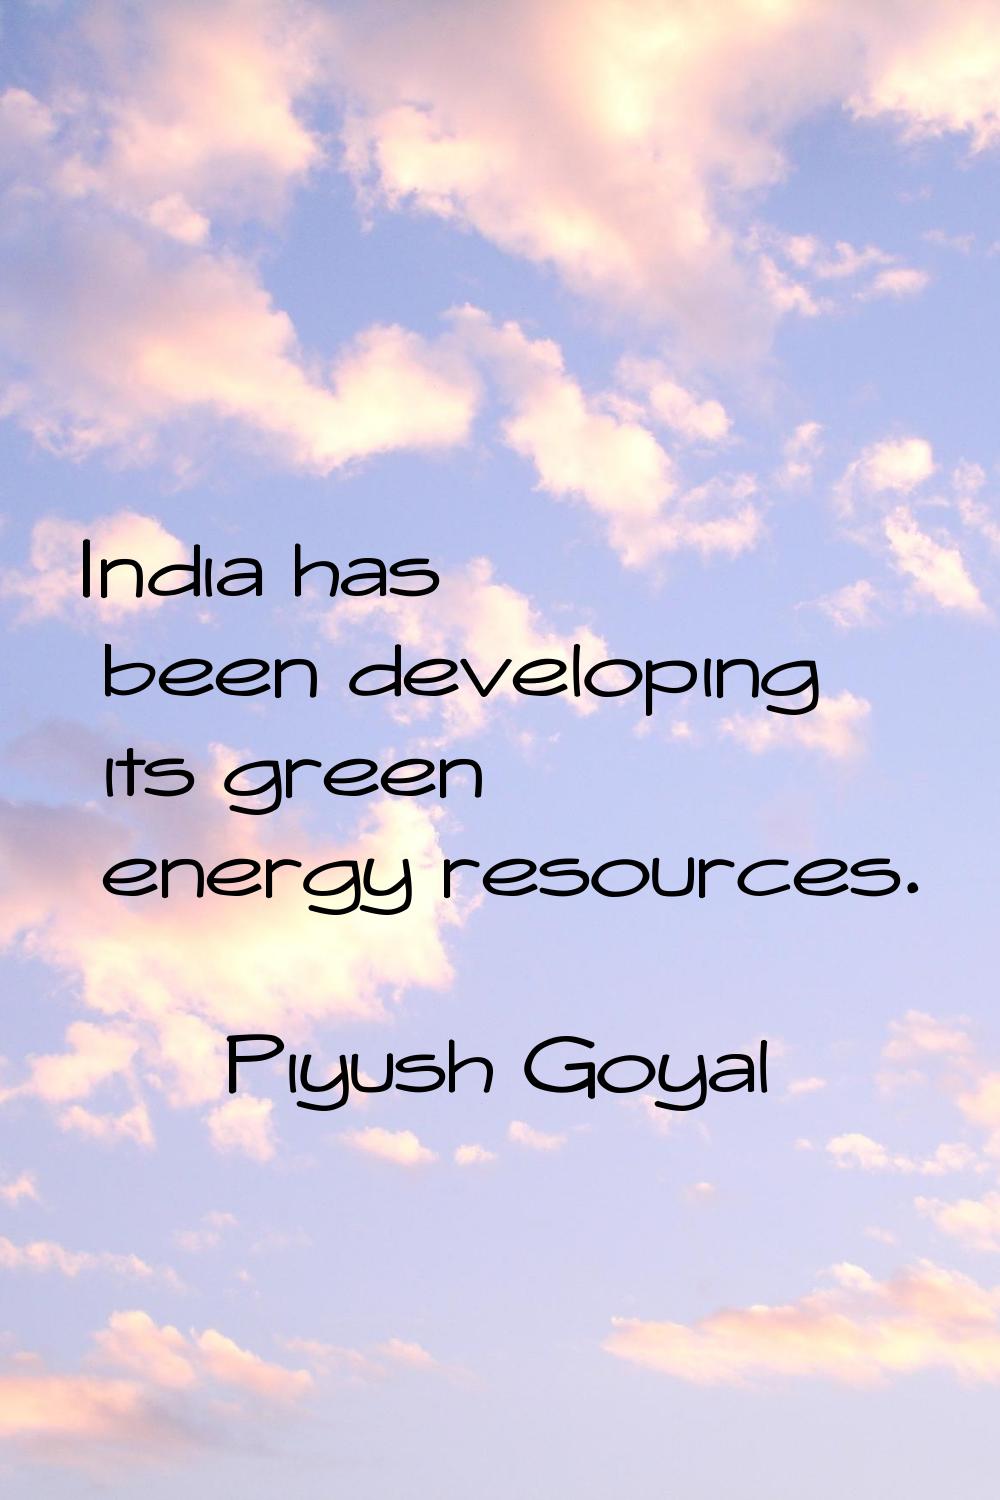 India has been developing its green energy resources.